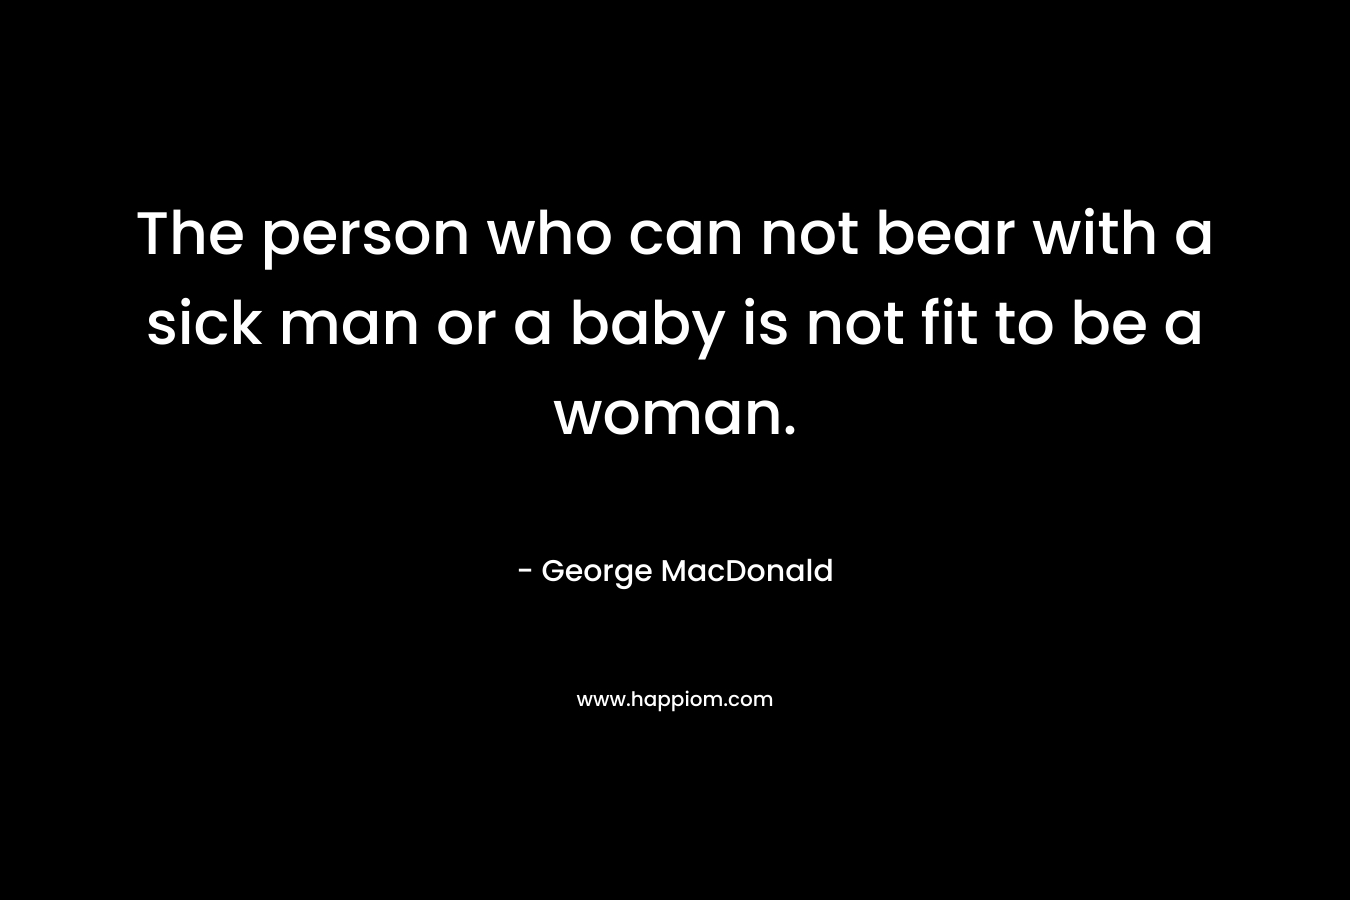 The person who can not bear with a sick man or a baby is not fit to be a woman. – George MacDonald